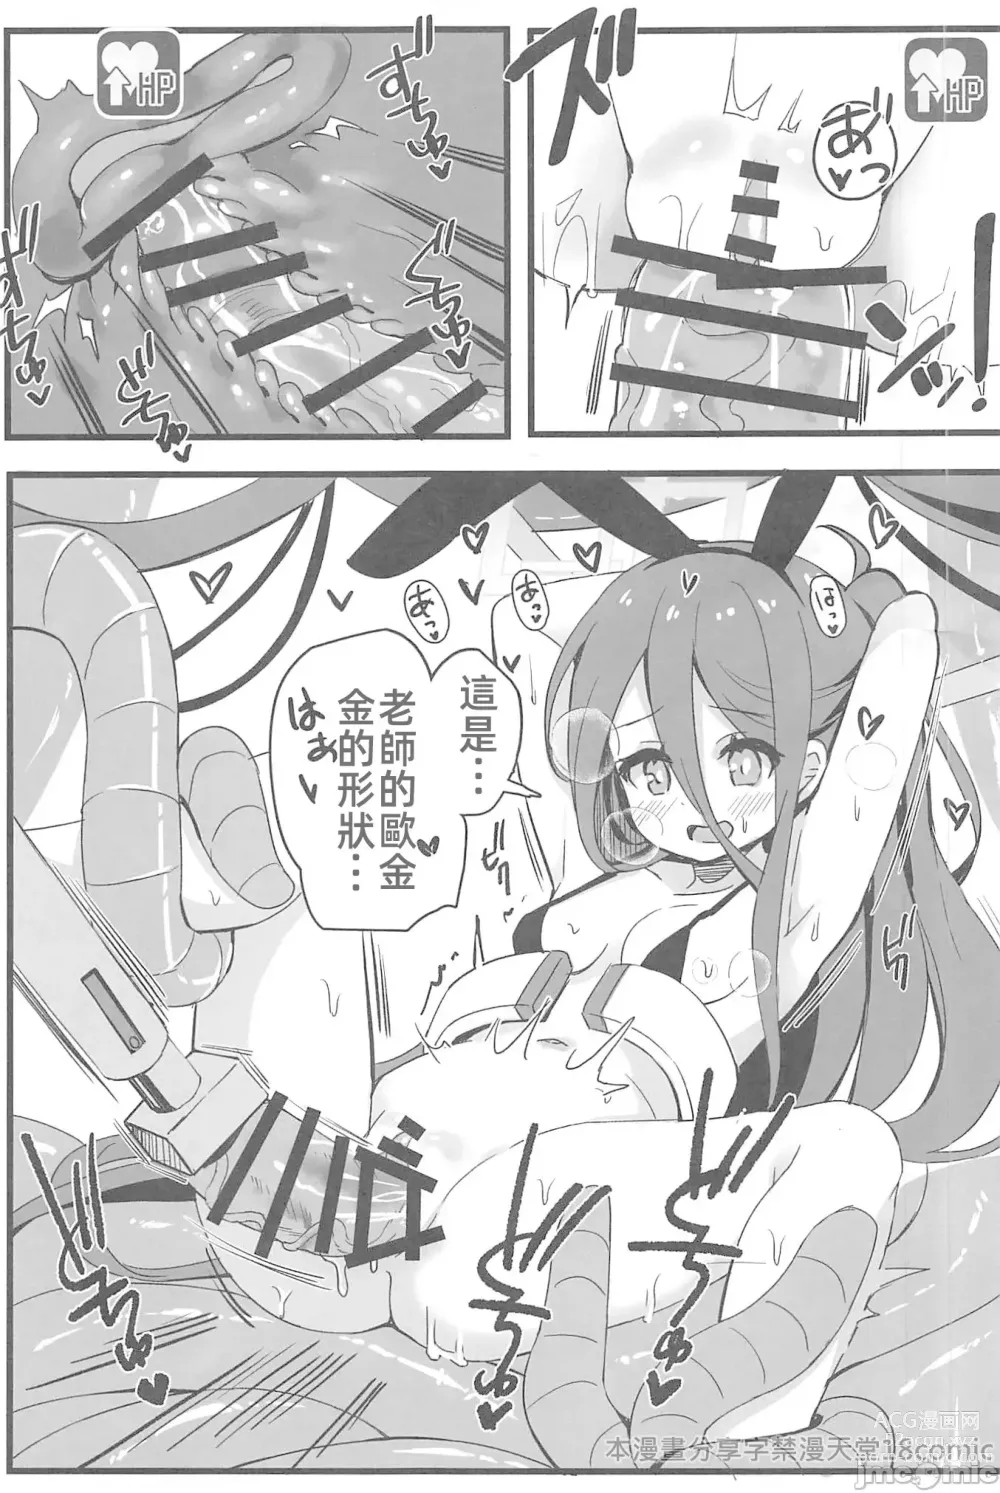 Page 16 of doujinshi 絕對要攻克給你看!!